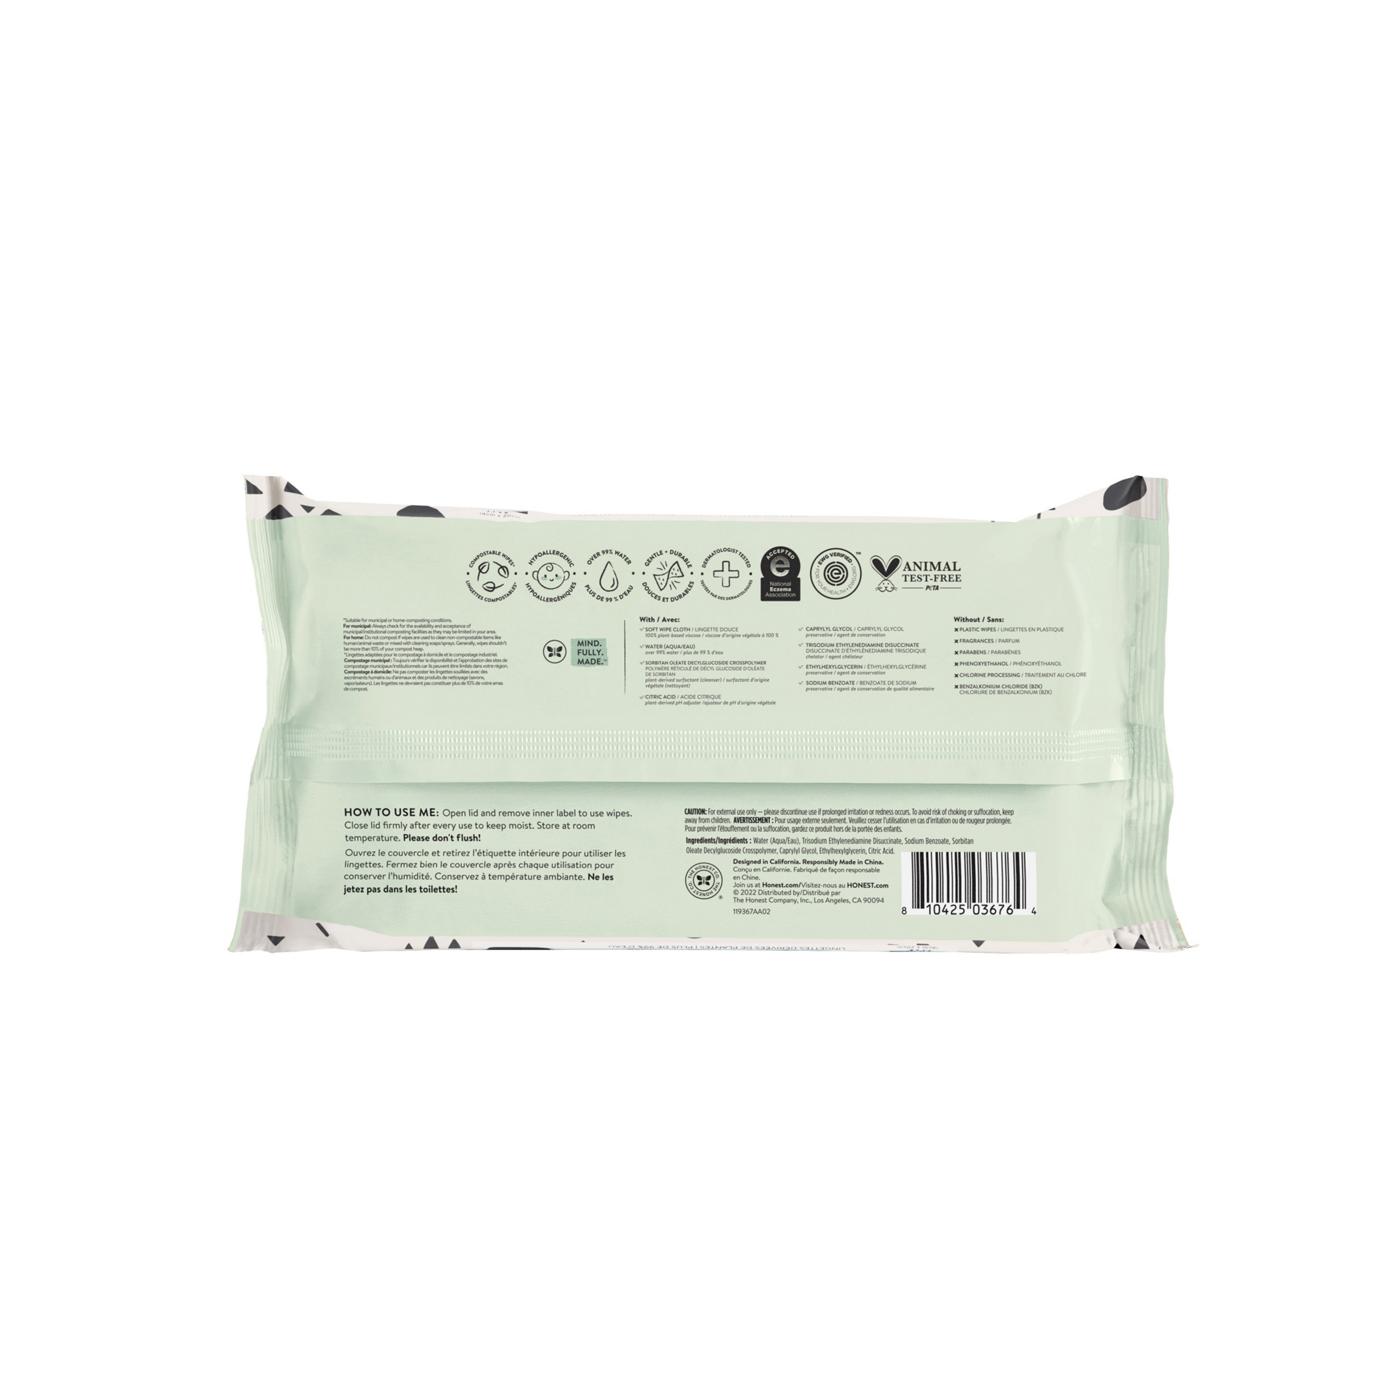 The Honest Company Designer Collection Baby Wipes; image 3 of 4